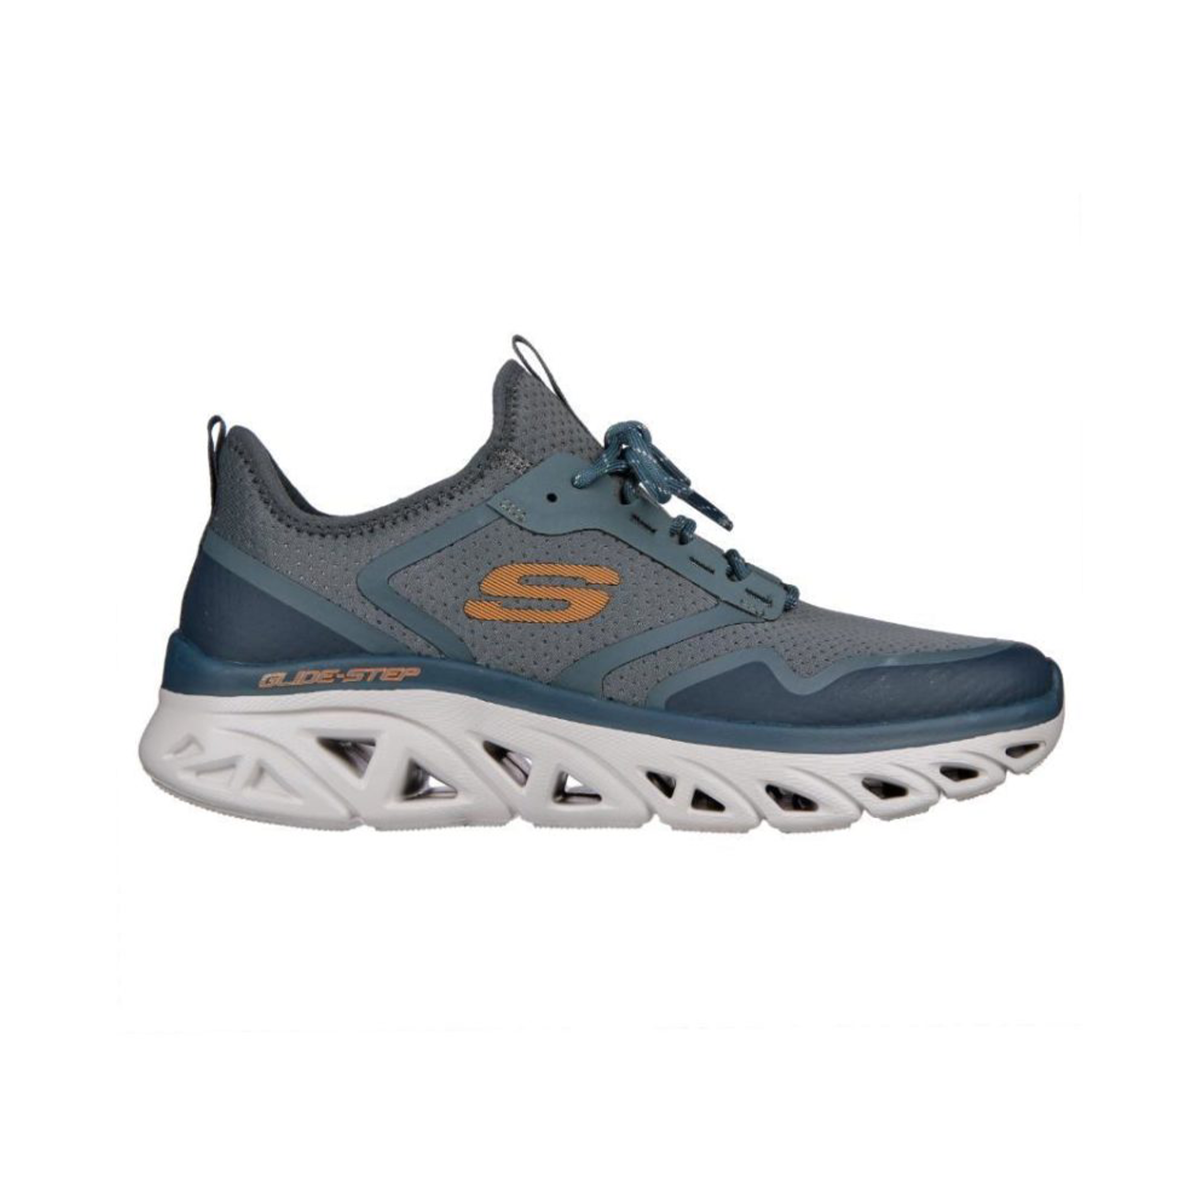 Skechers Glide Step Sports Shoes For Men, Navy